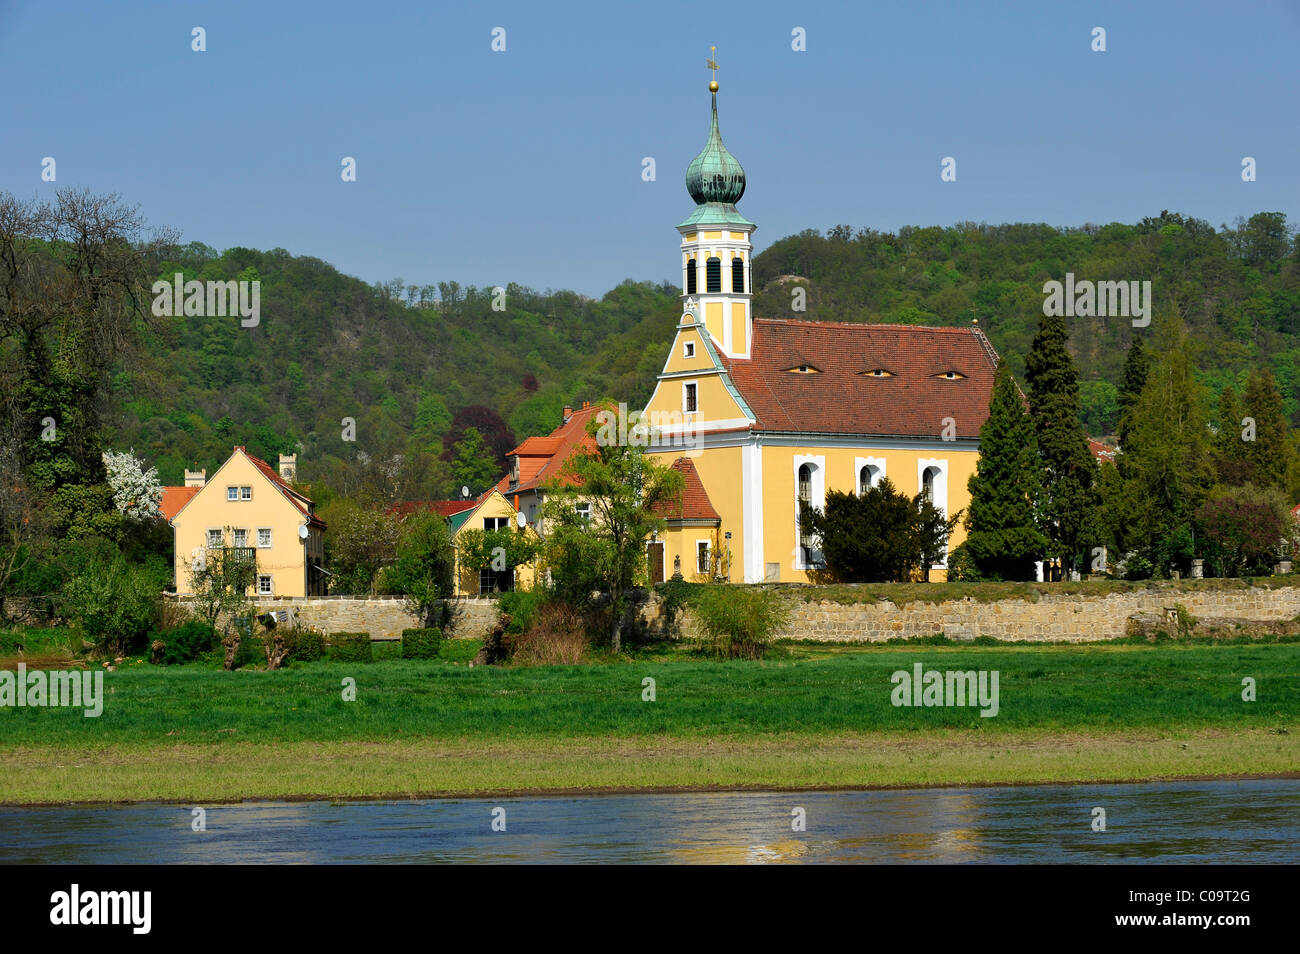 Maria am Wasser mariner's church on the Elbe river in Hosterwitz-Pillnitz in Dresden, Saxony, Germany, Europa Stock Photo